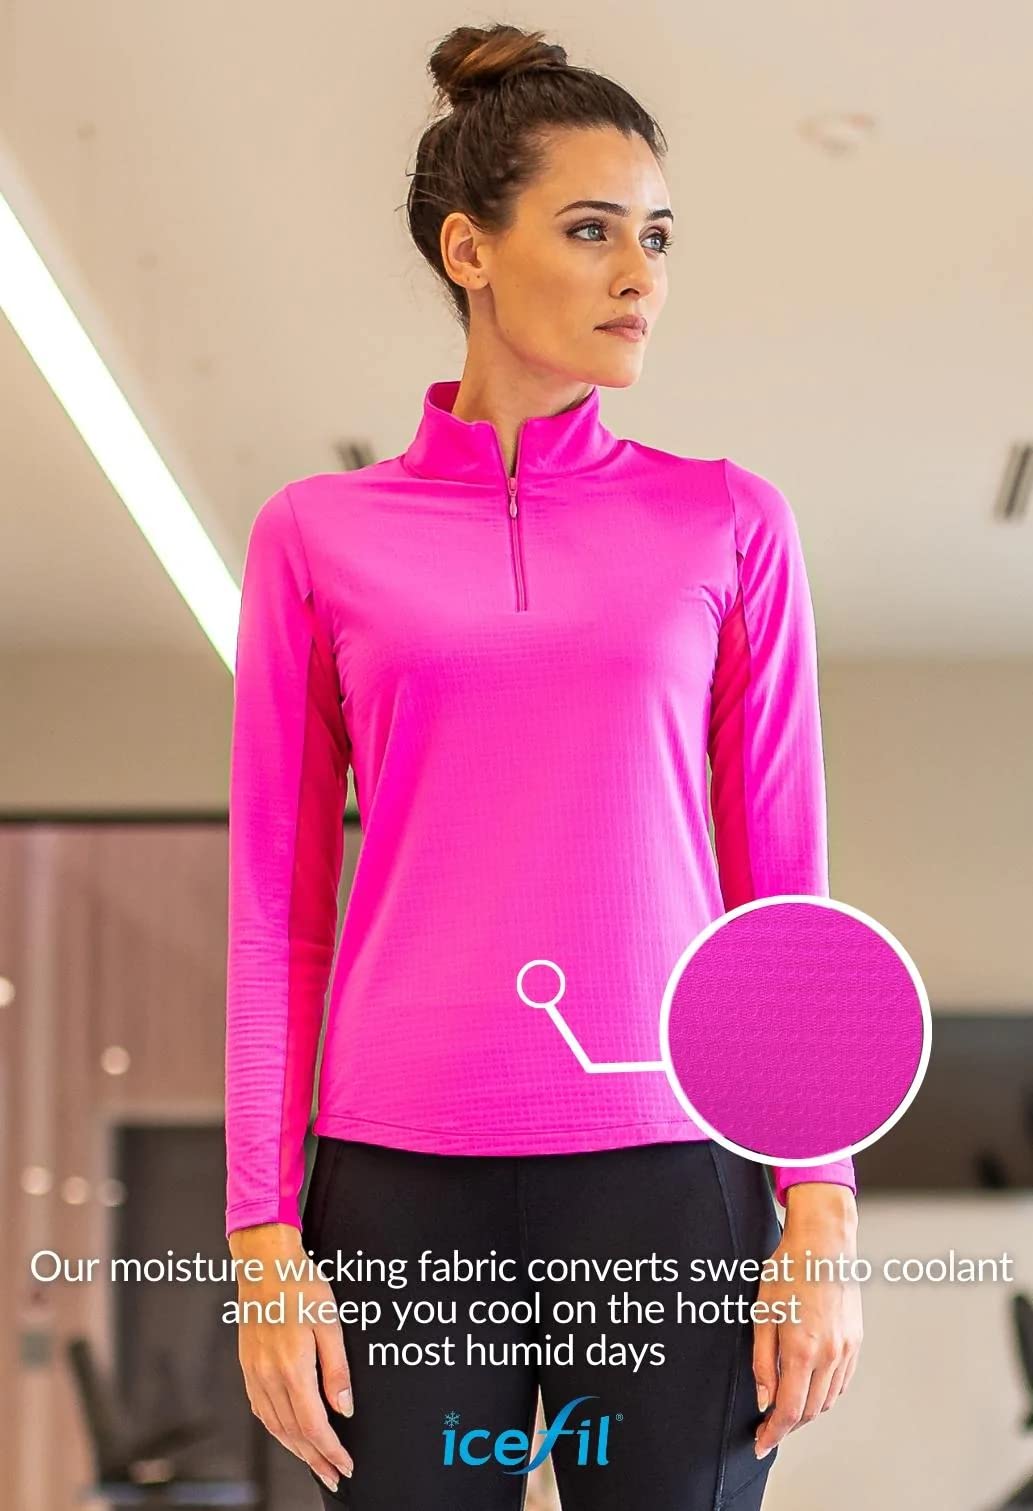 IBKUL Athleisure Wear Sun Protective UPF 50+ Icefil Cooling Tech Long Sleeve Mock Neck Top with Under Arm Mesh 80000 Watermelon Solid L